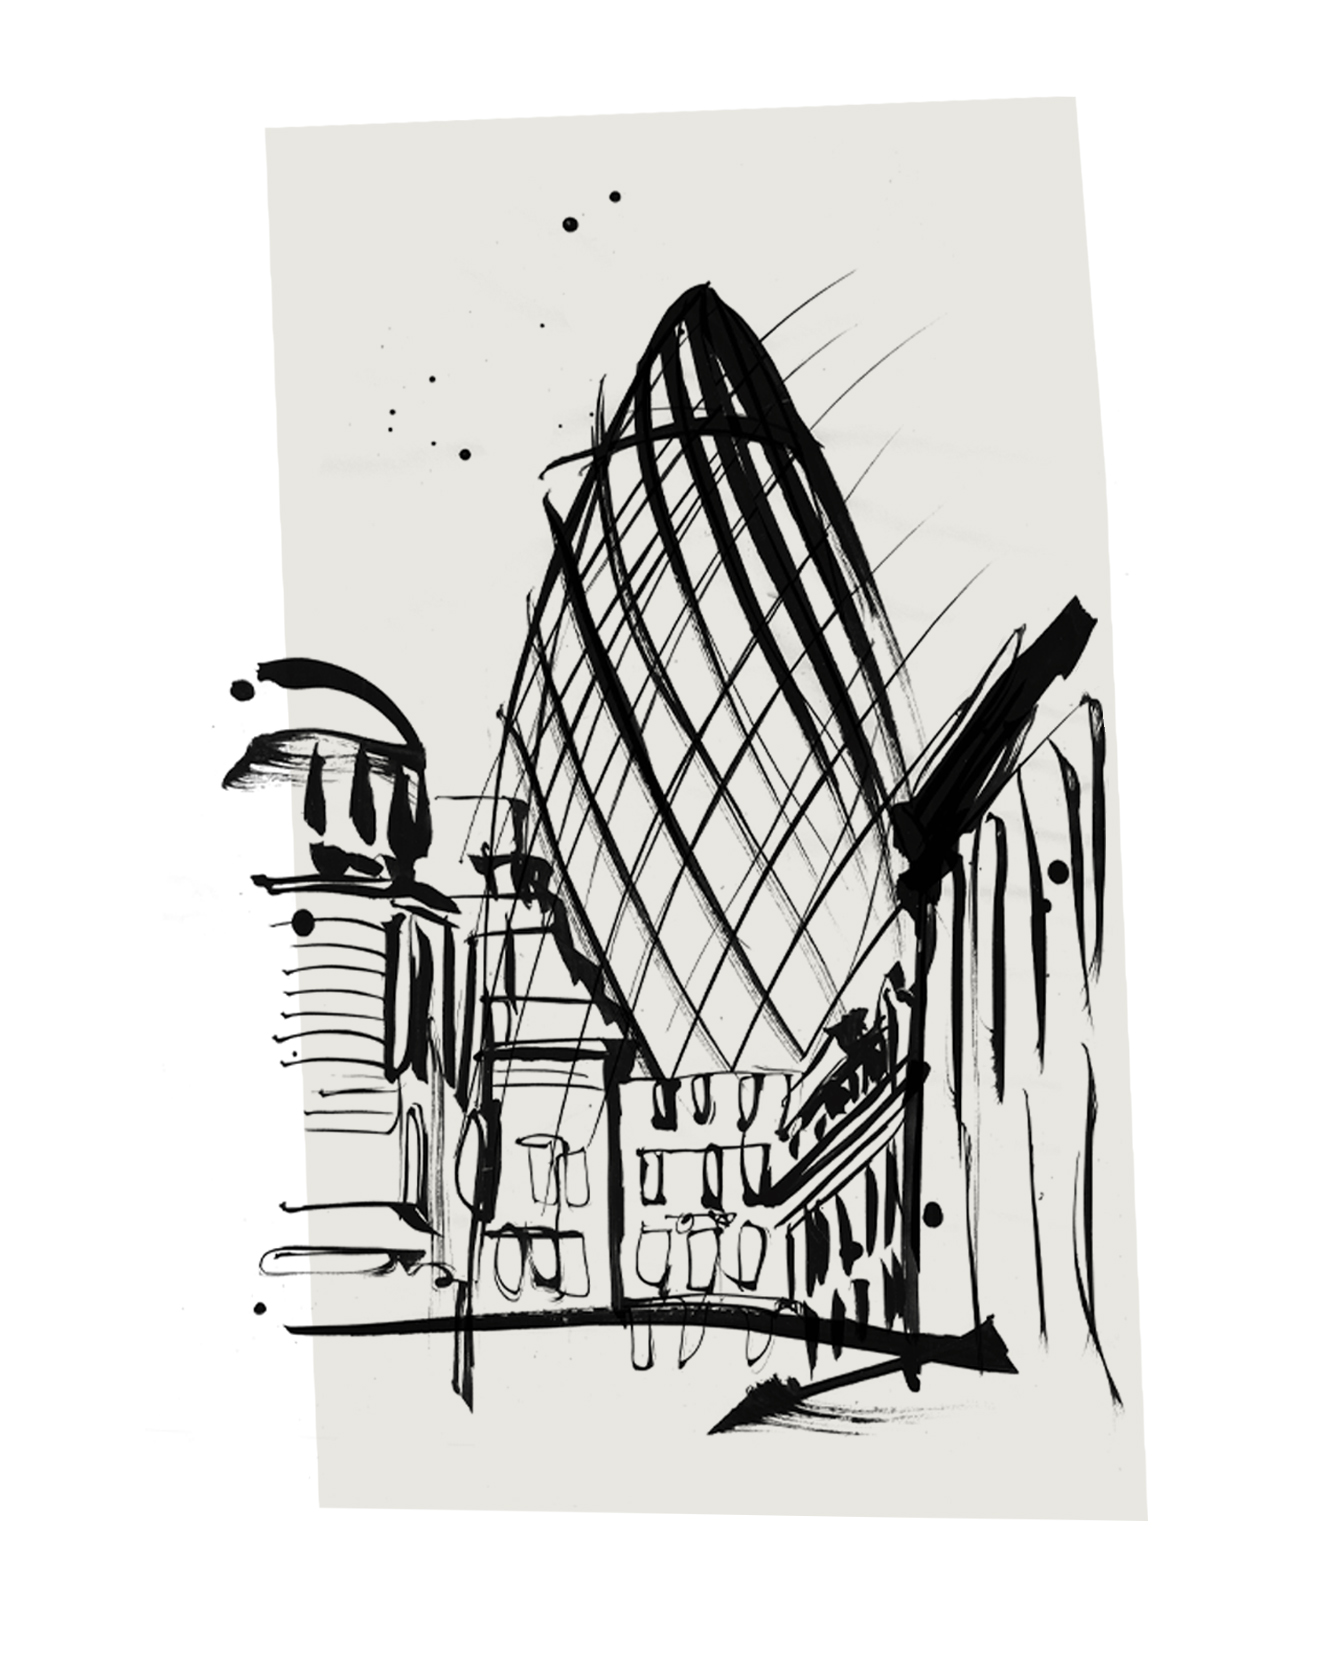 Early drawings of the Gerhkin London landmarks in celebration of London Design Festival. Initial stage of the project capturing iconic London architecture and the energy of the city. Black ink drawing and hand drawn lettering